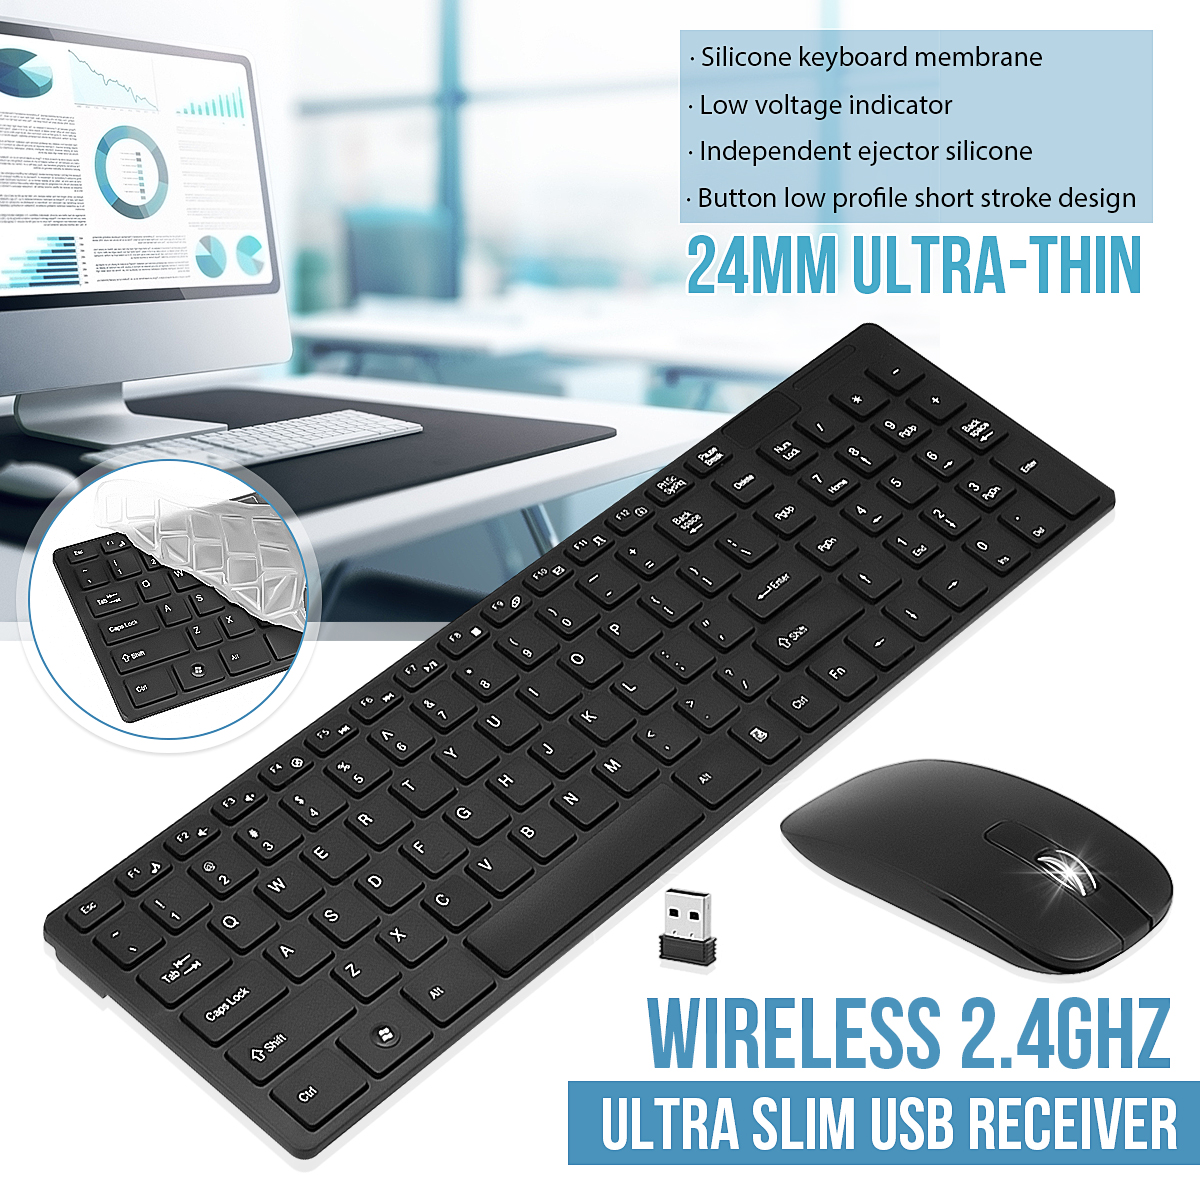 Ultra Slim Wireless Keyboard and Mouse Combo, 2.4GHz Full-Sized Silent Wireless Keyboard and Mouse Combo with USB Receiver for Laptop, PC - image 3 of 7